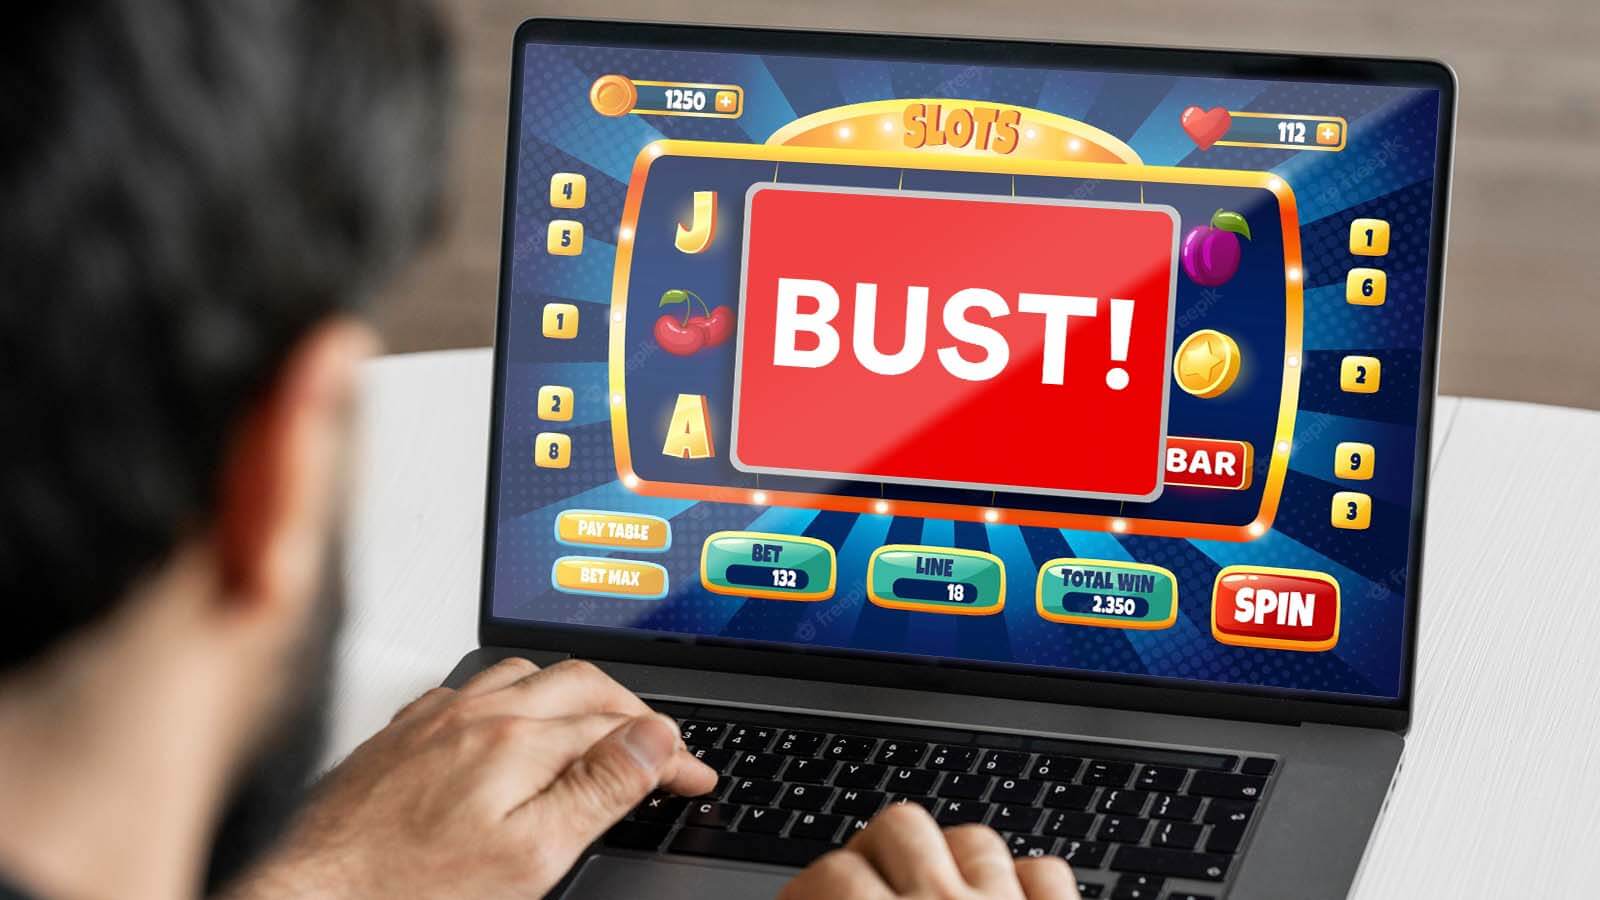 Main reasons why an online casino goes bust